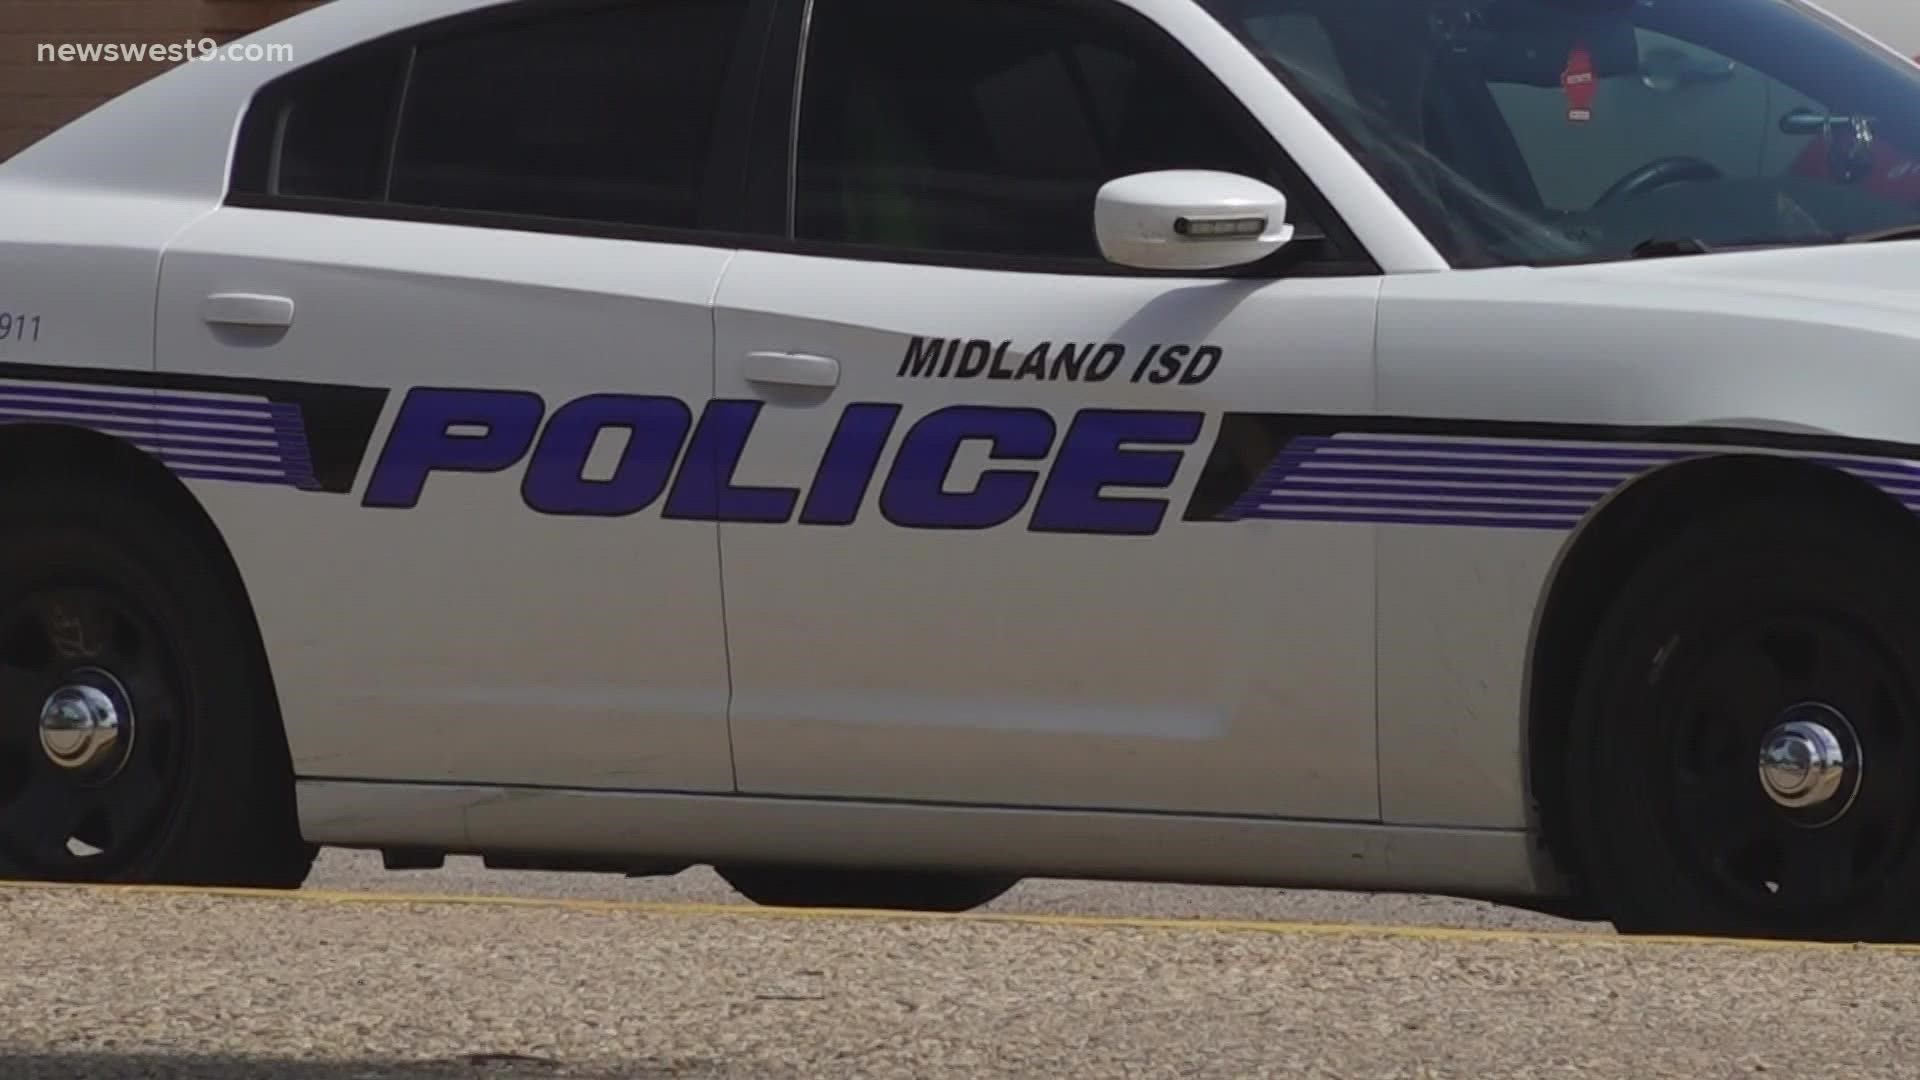 Midland ISD leaders have opened an investigation into the threat made on social media targeting people at Midland Freshman High School.